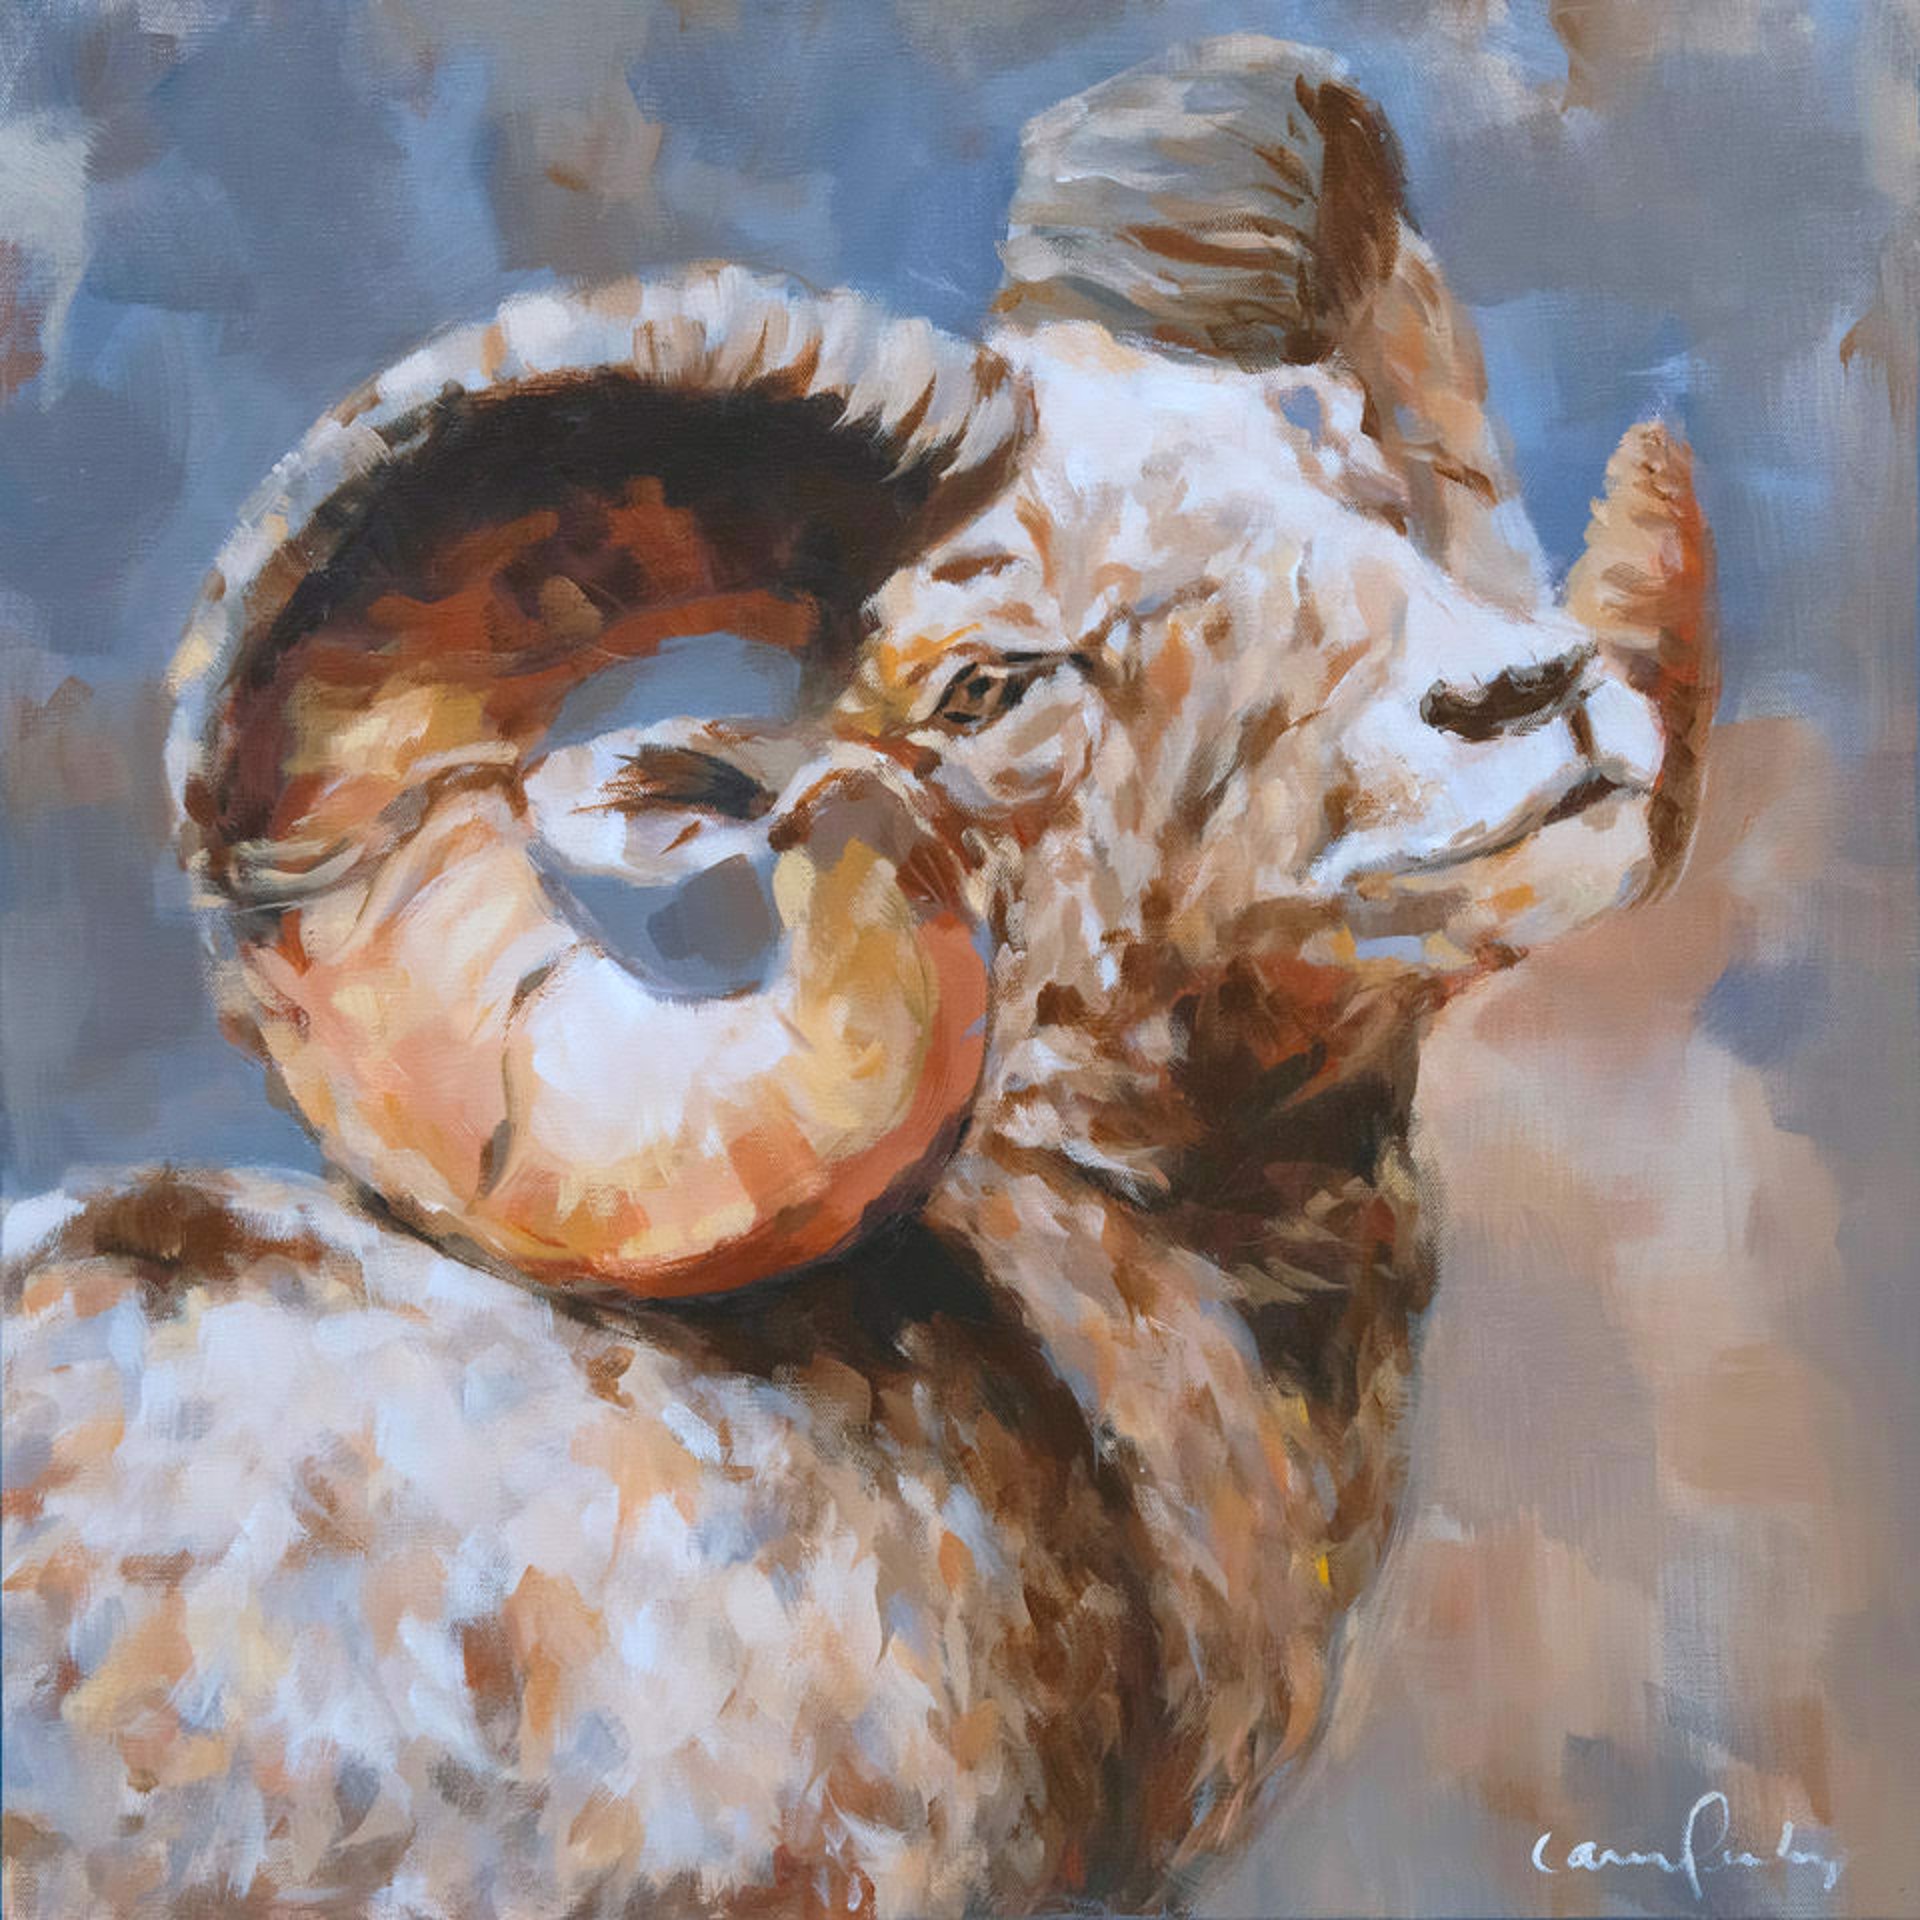 A Contemporary Acrylic Painting Of A Bighorn Sheep By Carrie Penley Available At Gallery Wild